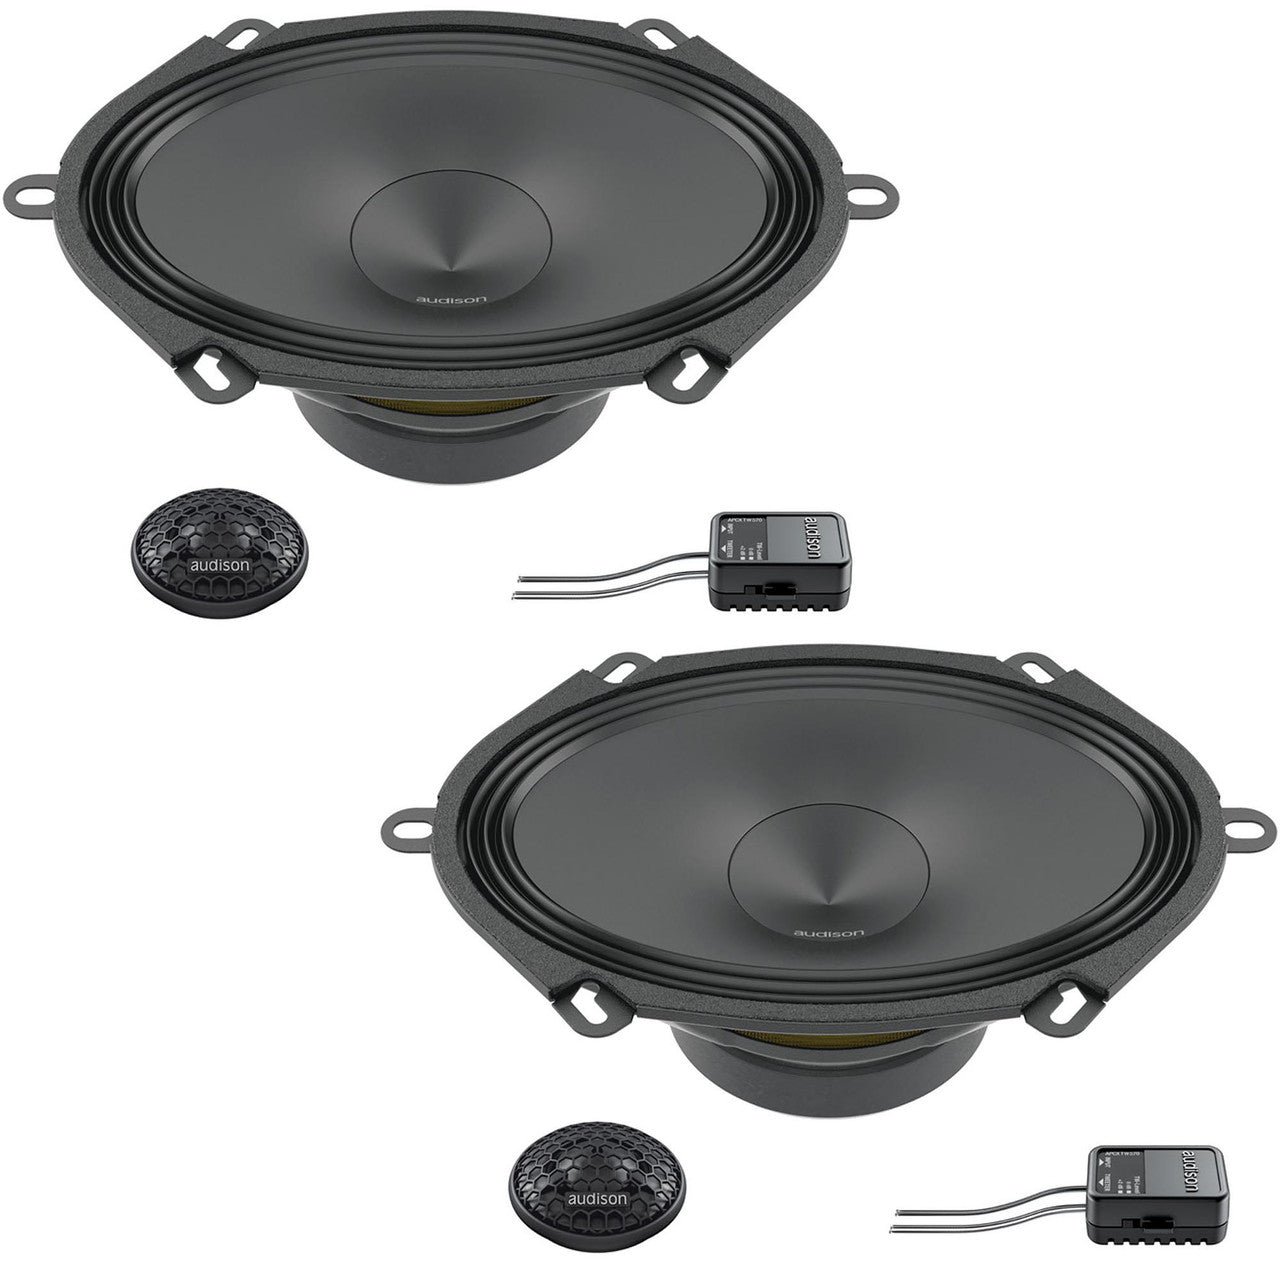 Audison F-150 11-14 5.9 Audison Front, Rear, Amp, and 8" Sub Bundle Compatible With 11-14 Ford F-150 Non Sony Sound Systems